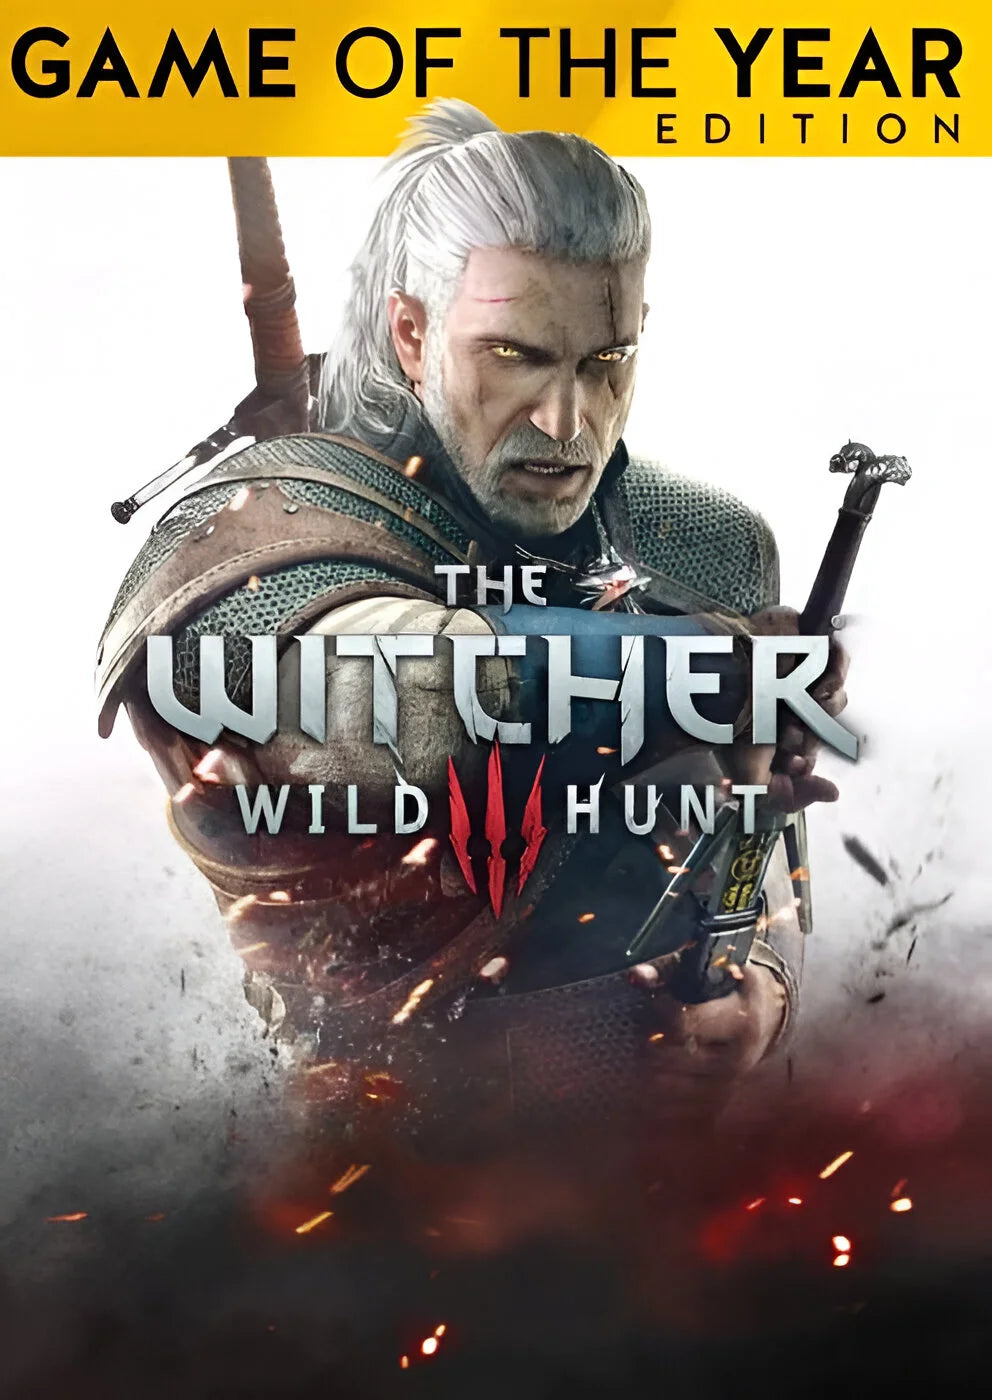 The Witcher 3: Wild Hunt Game of the Year Edition PC - Account